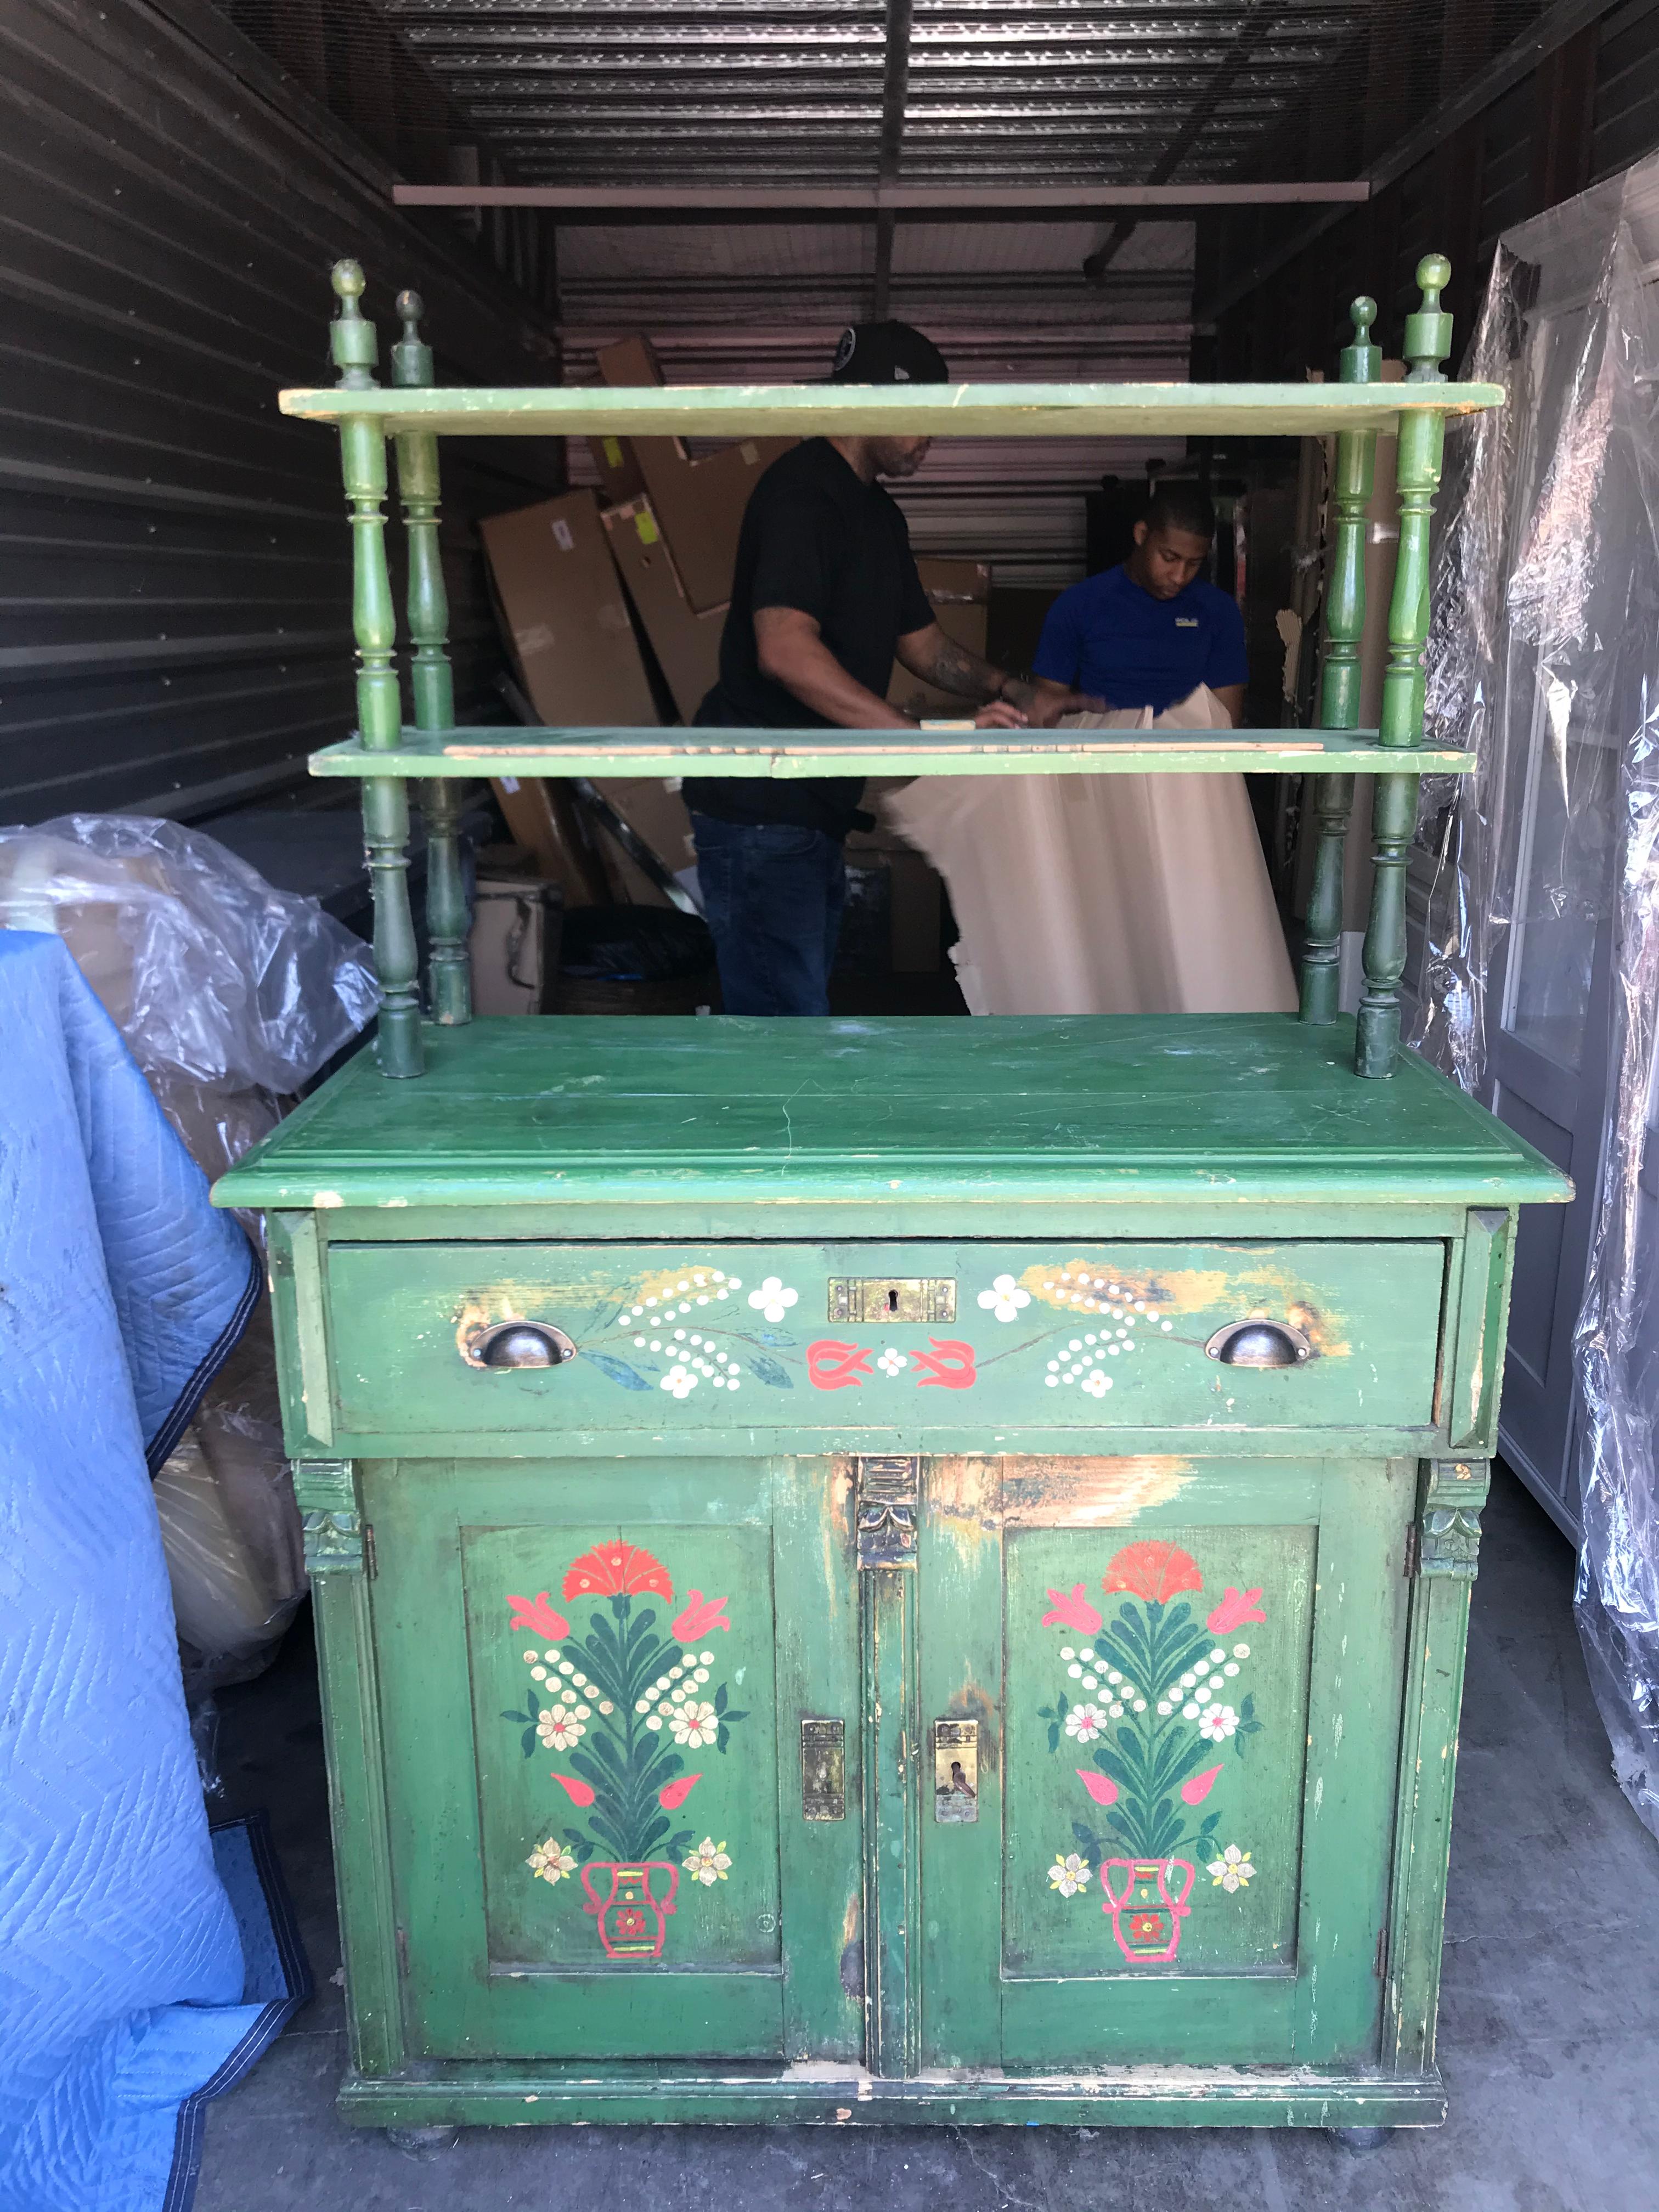 A amazing piece of art that embraces the Scandinavian Folklore and the accessibility of furniture. This antique Swedish hand painted hutch is coated with a vibrant green and embellished with hand painted flowers. A petite built perfect for any home.